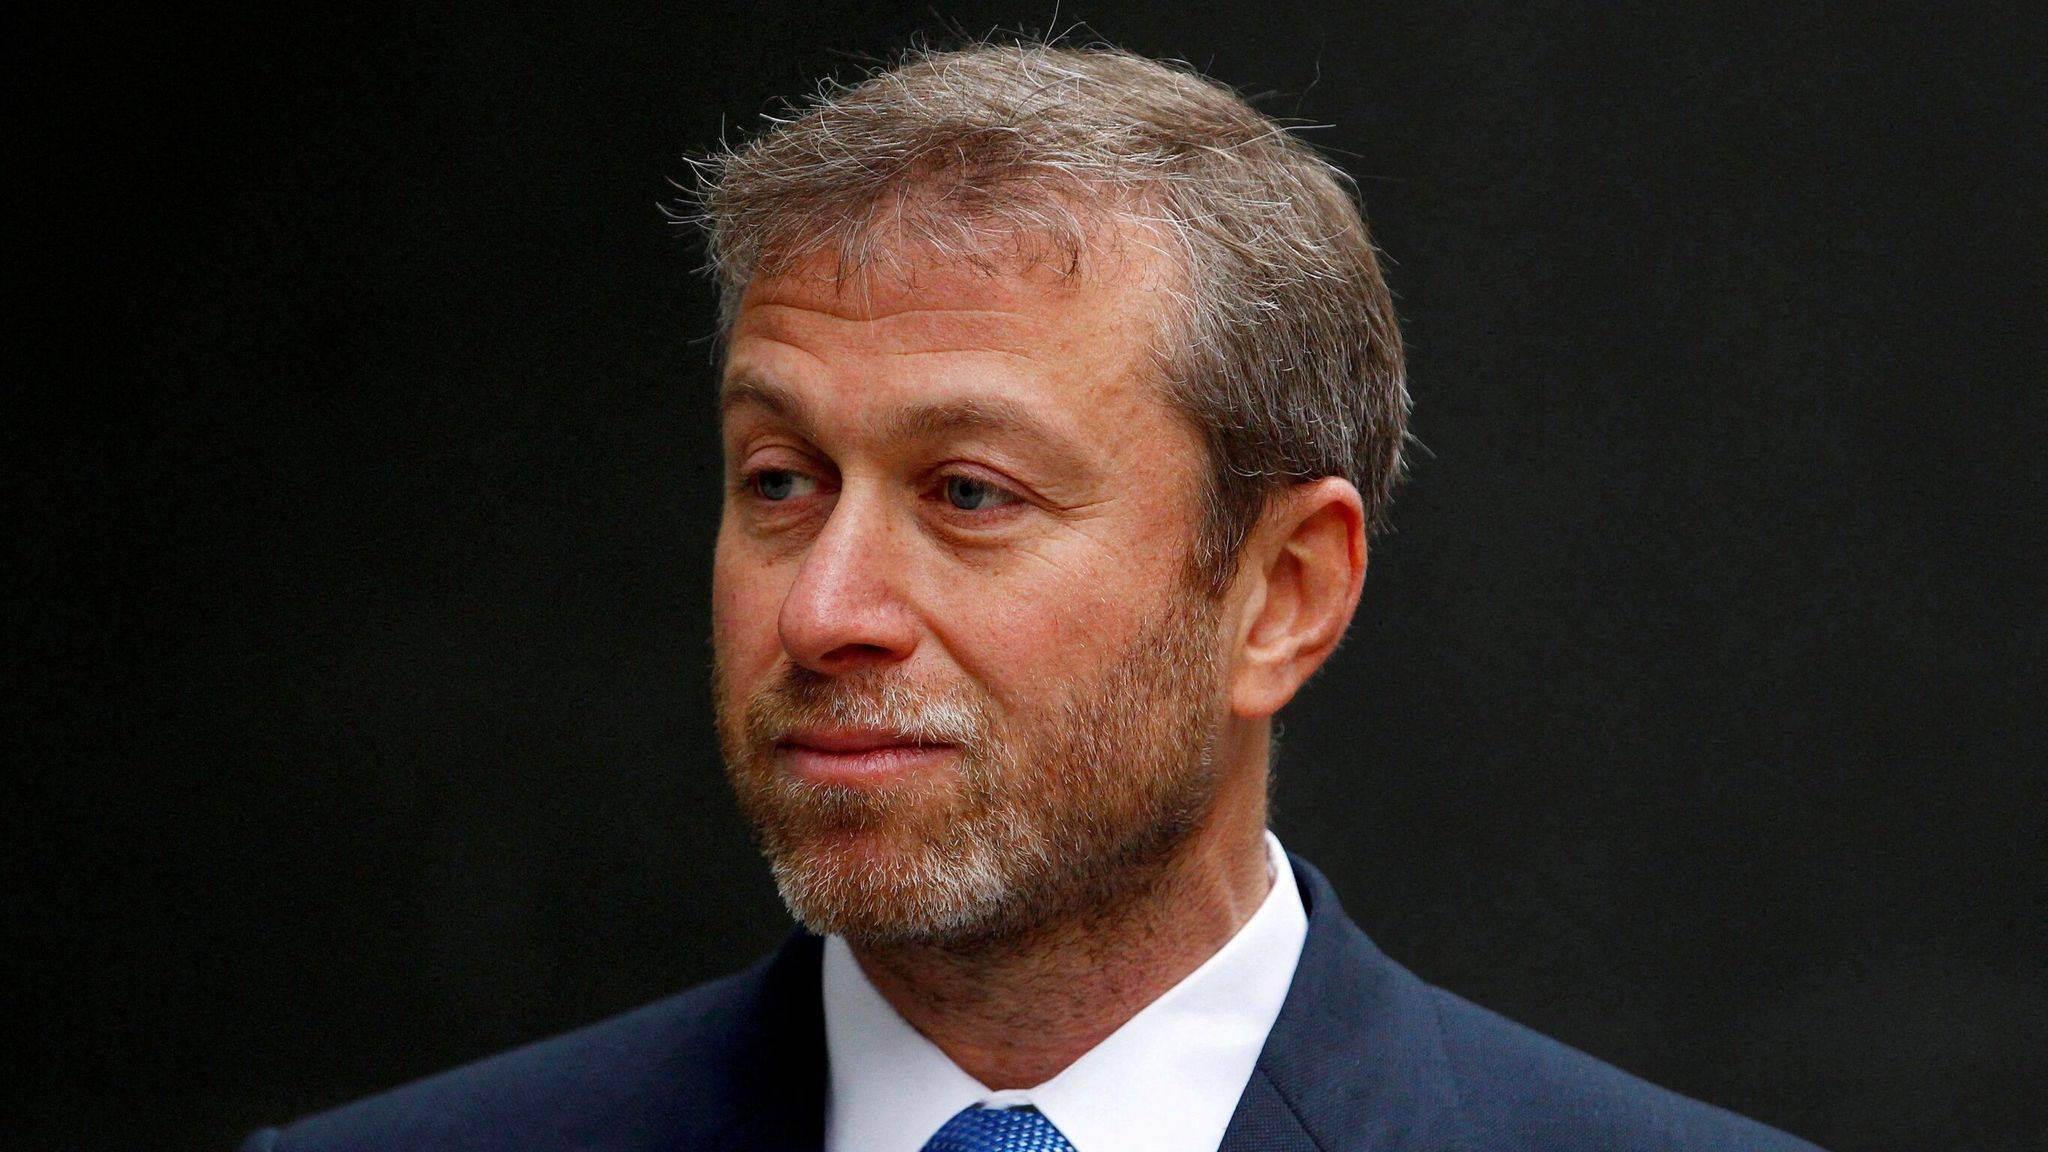 Russian billionaire Roman Abramovich's $7bn of assets seized by Jersey court